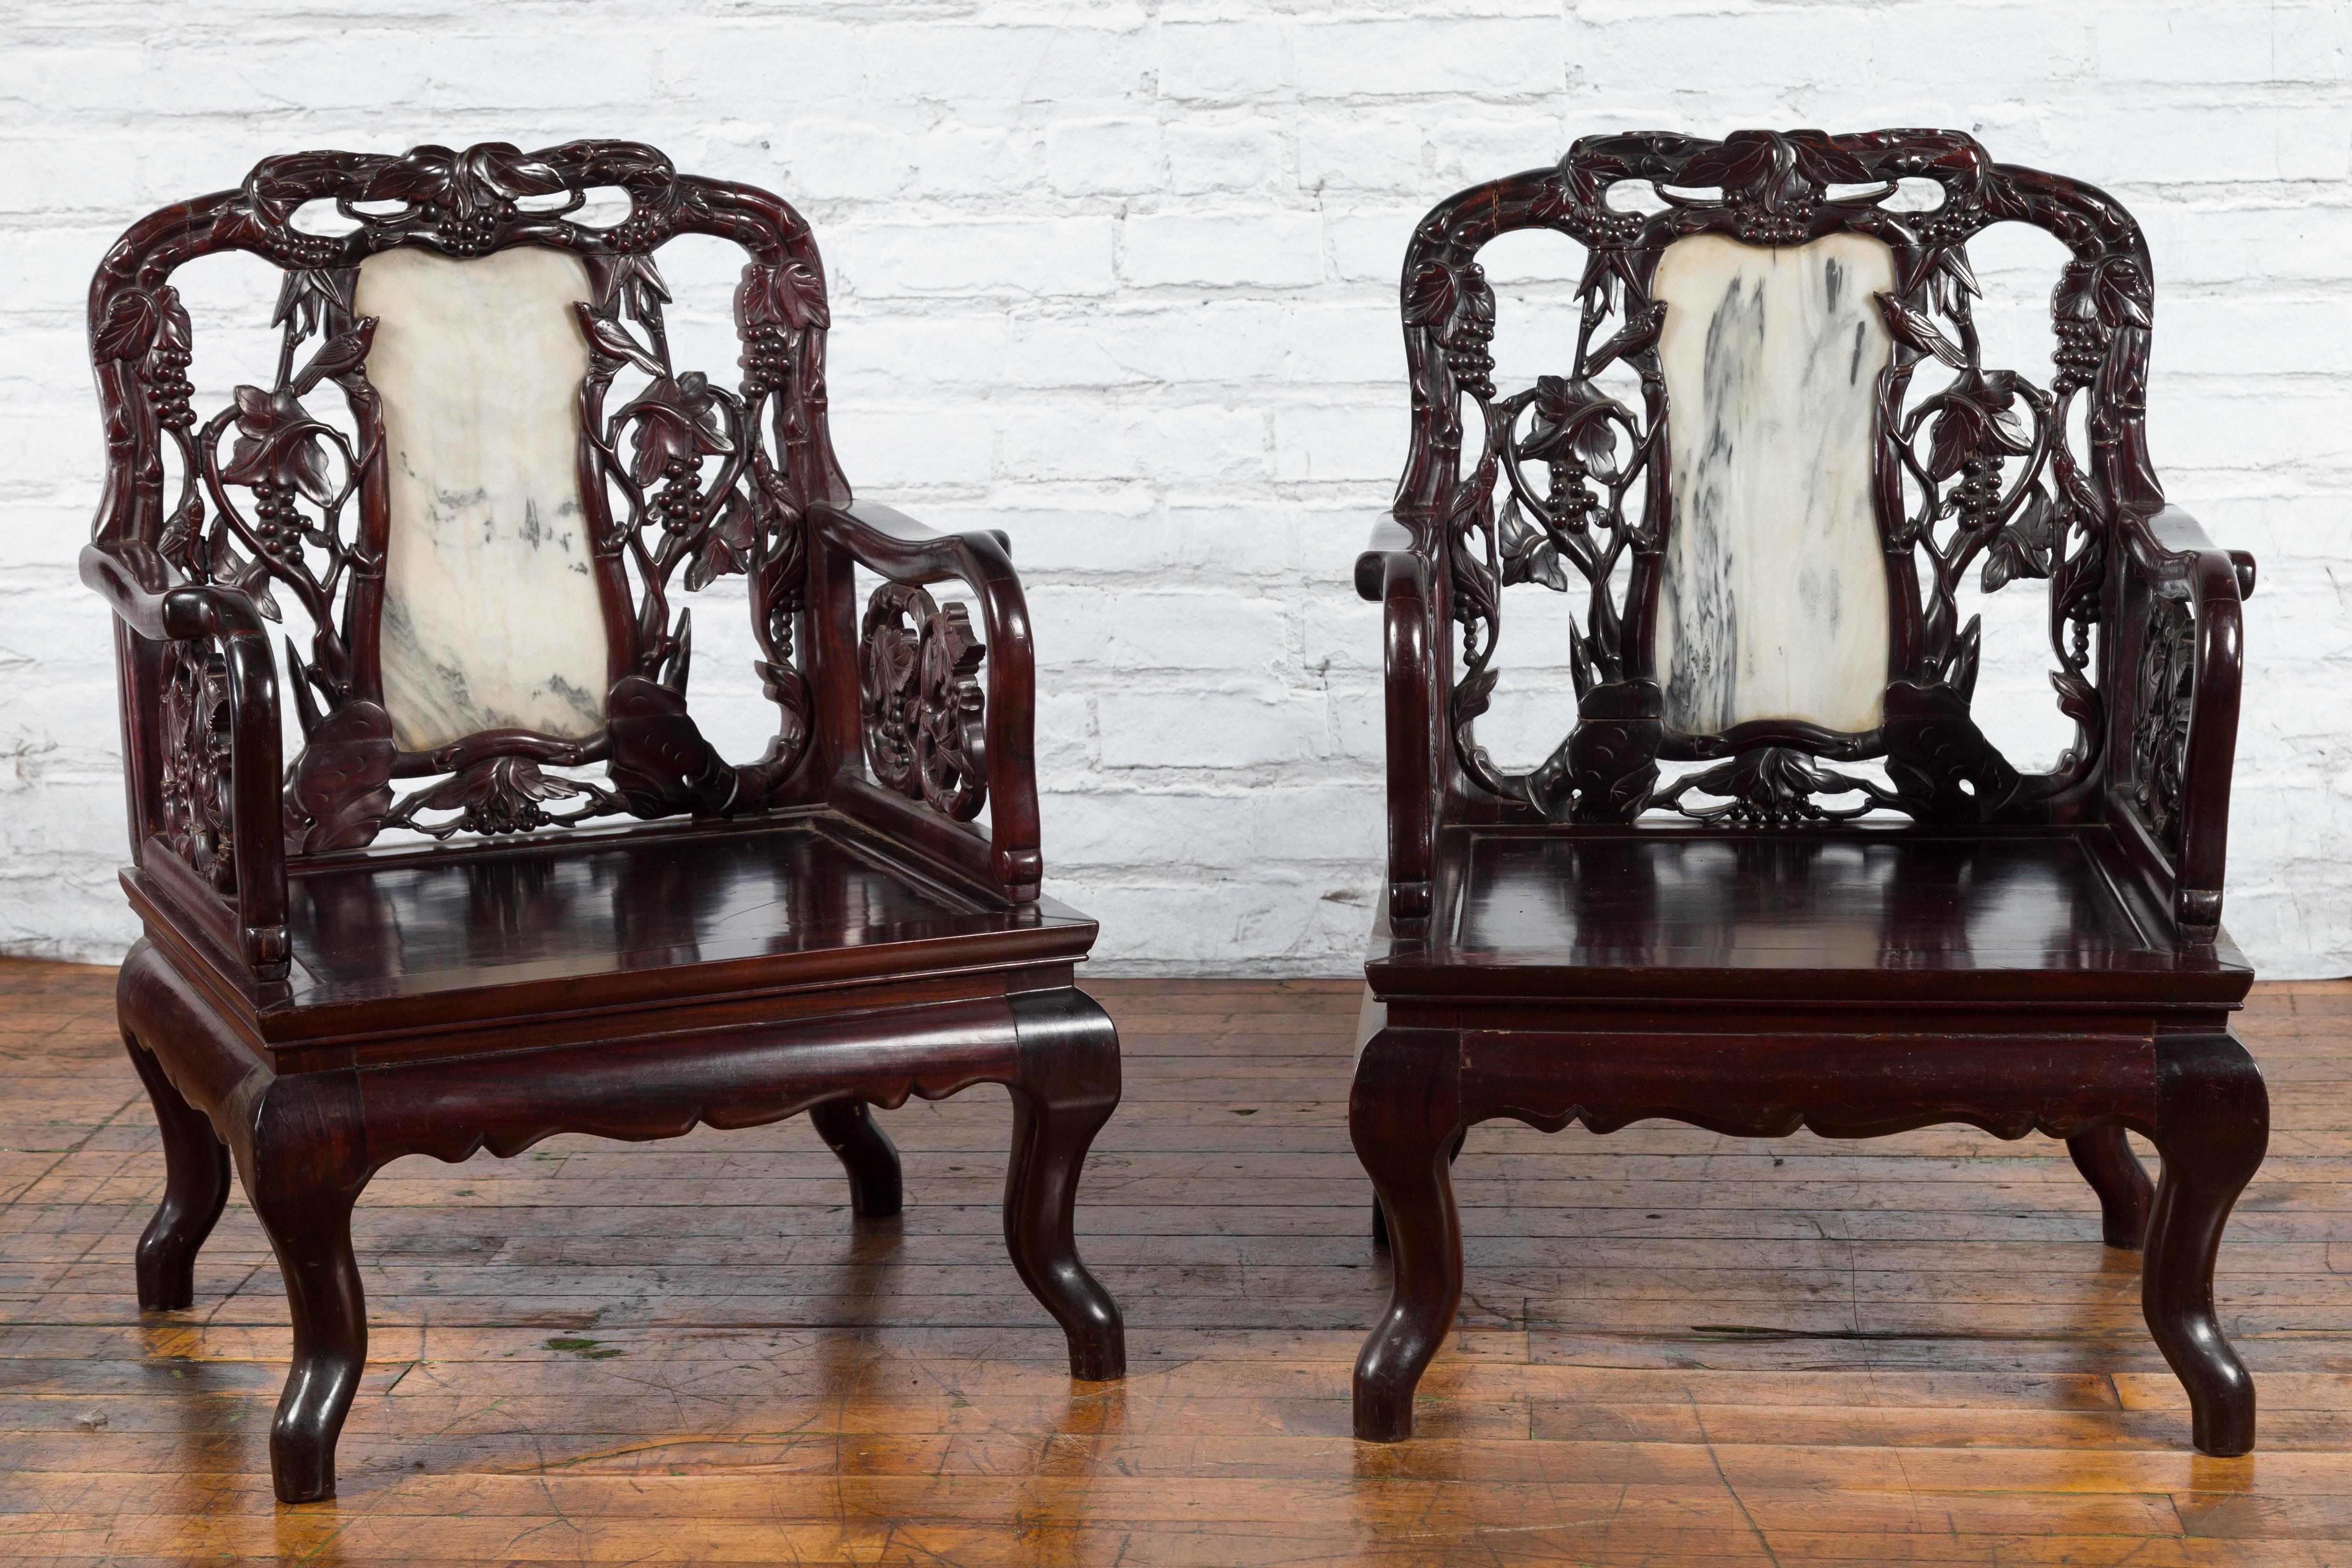 A pair of Chinese hand carved rosewood armchairs from the early 20th century with inset marble splats and dark patina. We currently have two pairs available, price and sold per pair. Possibly used by Chinese aristocrats, these rosewood armchairs